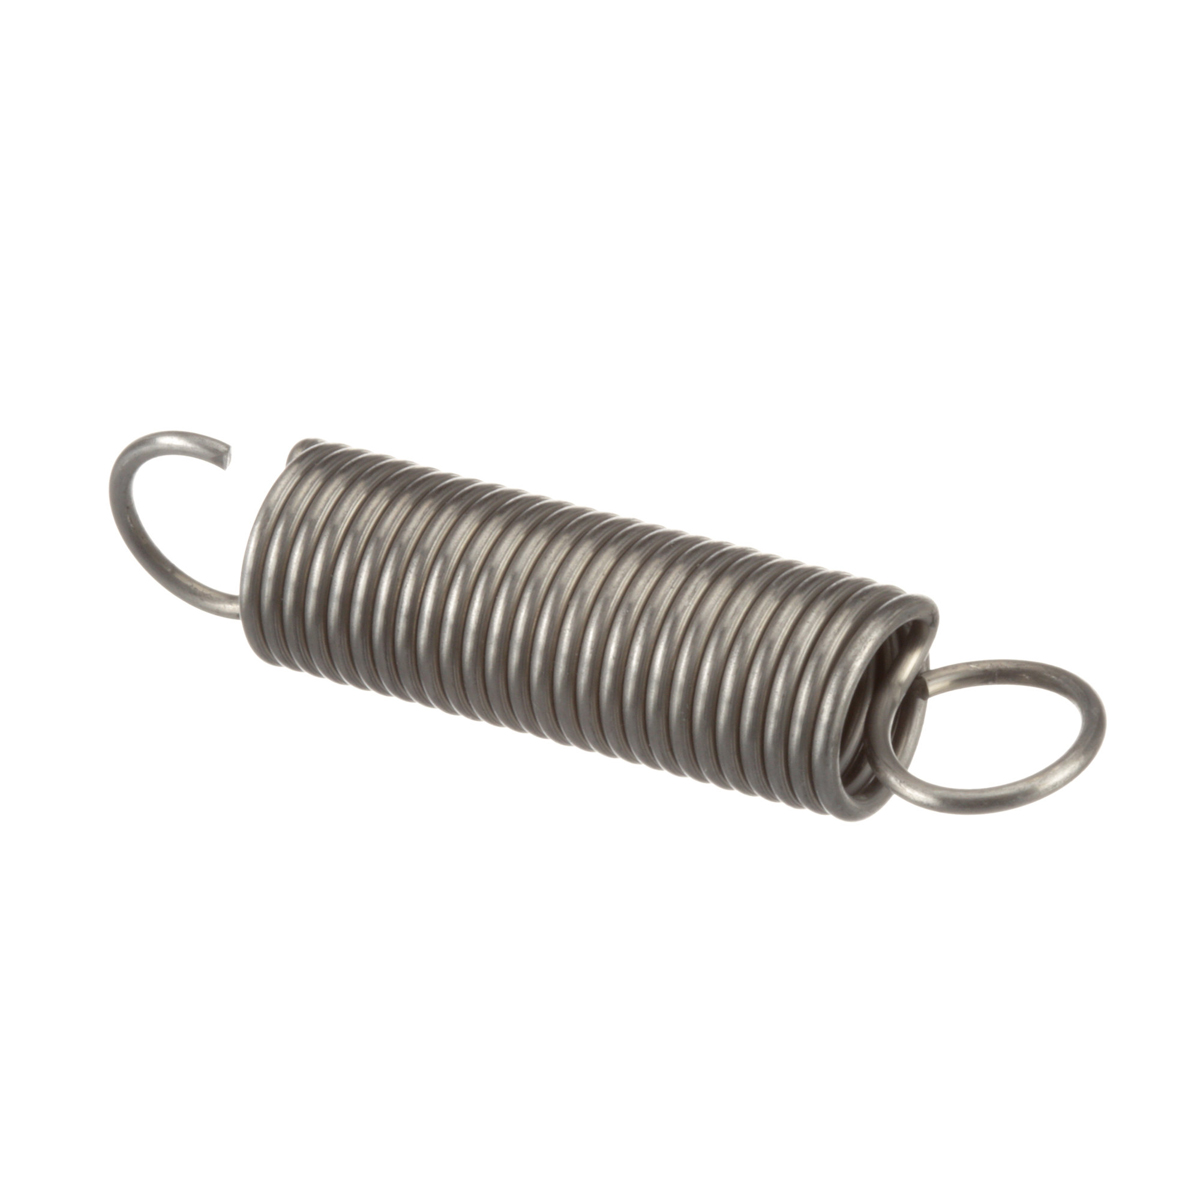 Somerset 4000-251 Scraper Spring for Dough Sheeters CDR-1550 and CDR-2000